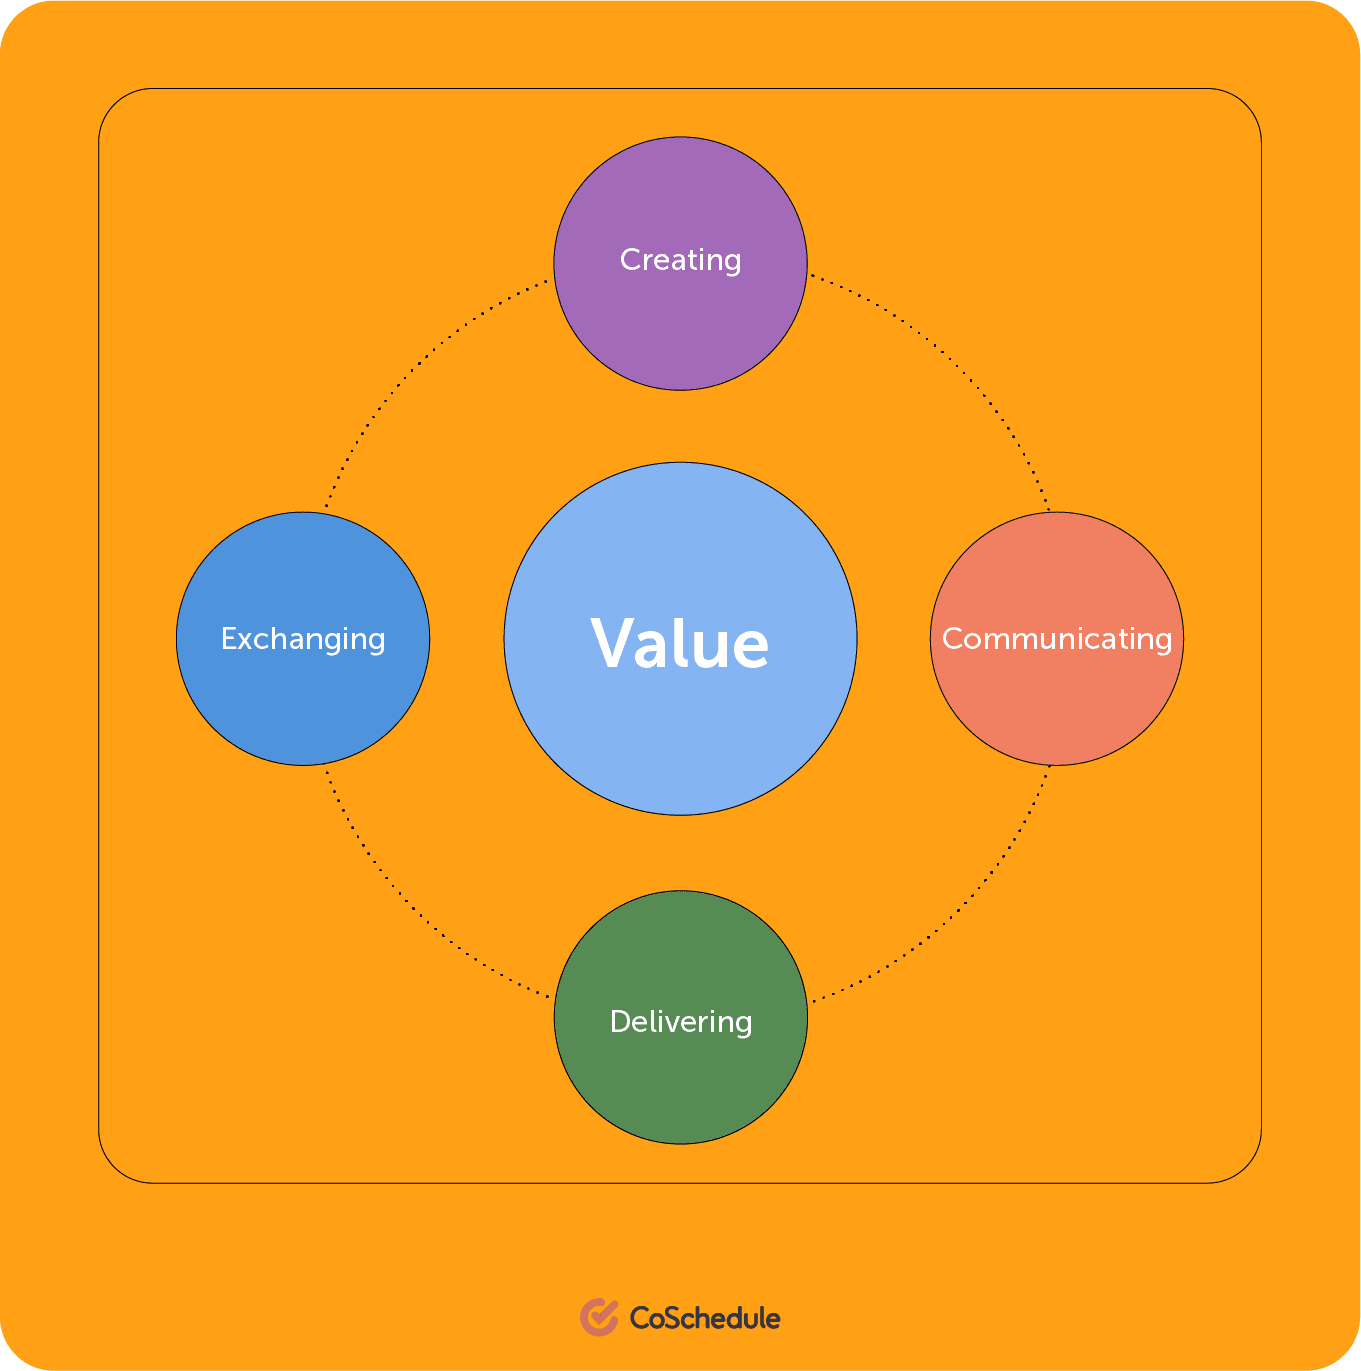 Value is surrounded by creating, exchanging, delivering, and communicating 